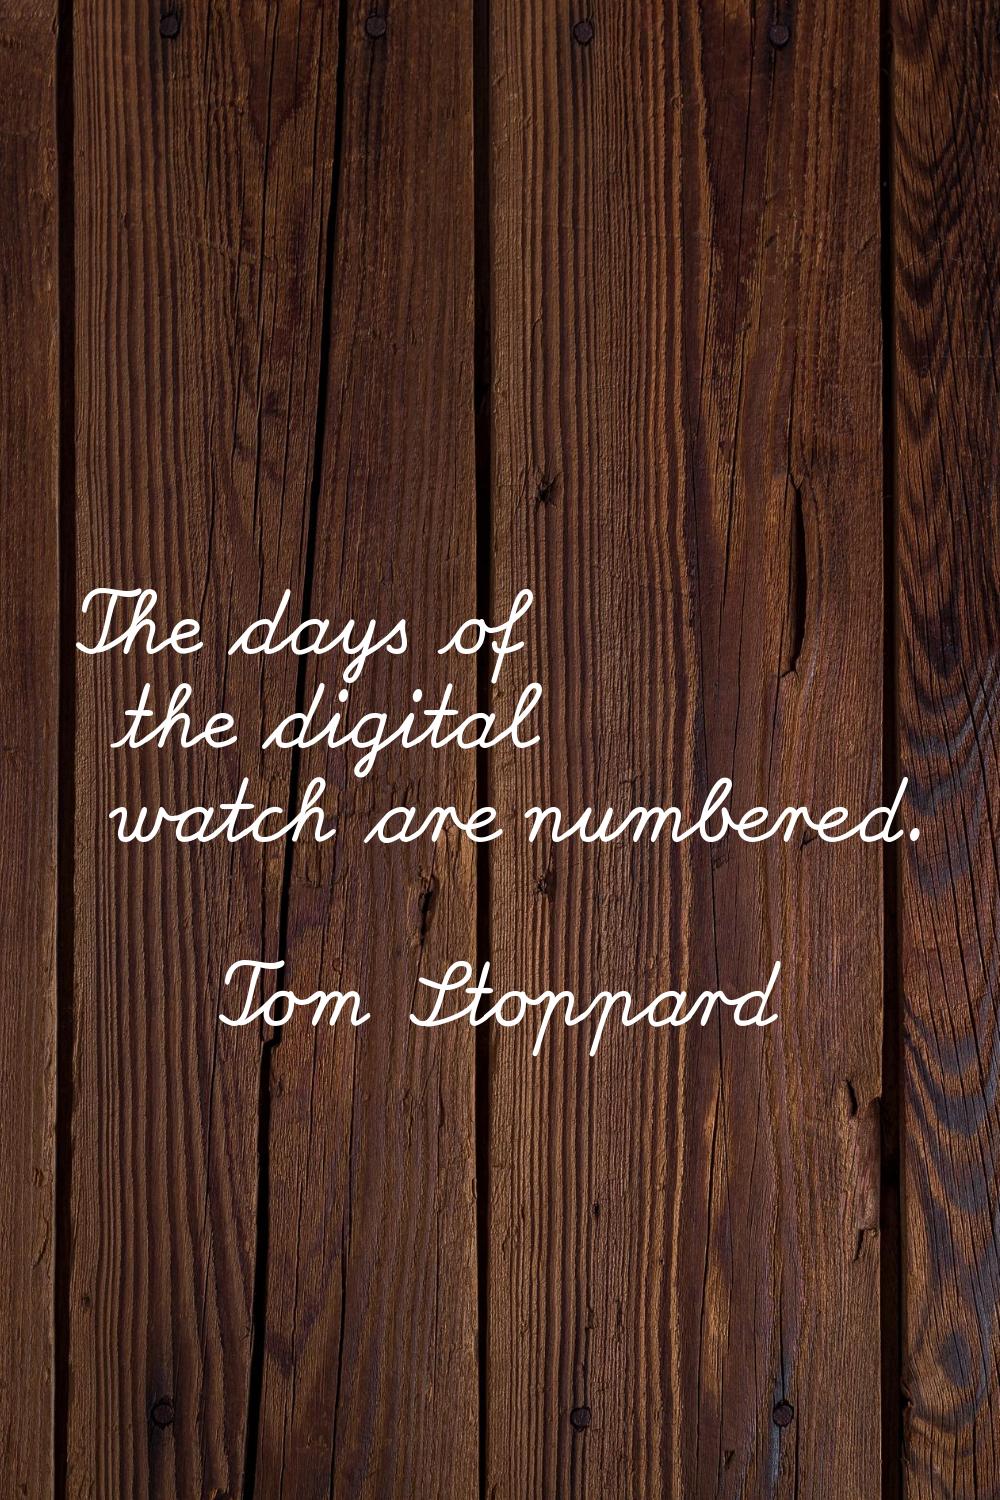 The days of the digital watch are numbered.